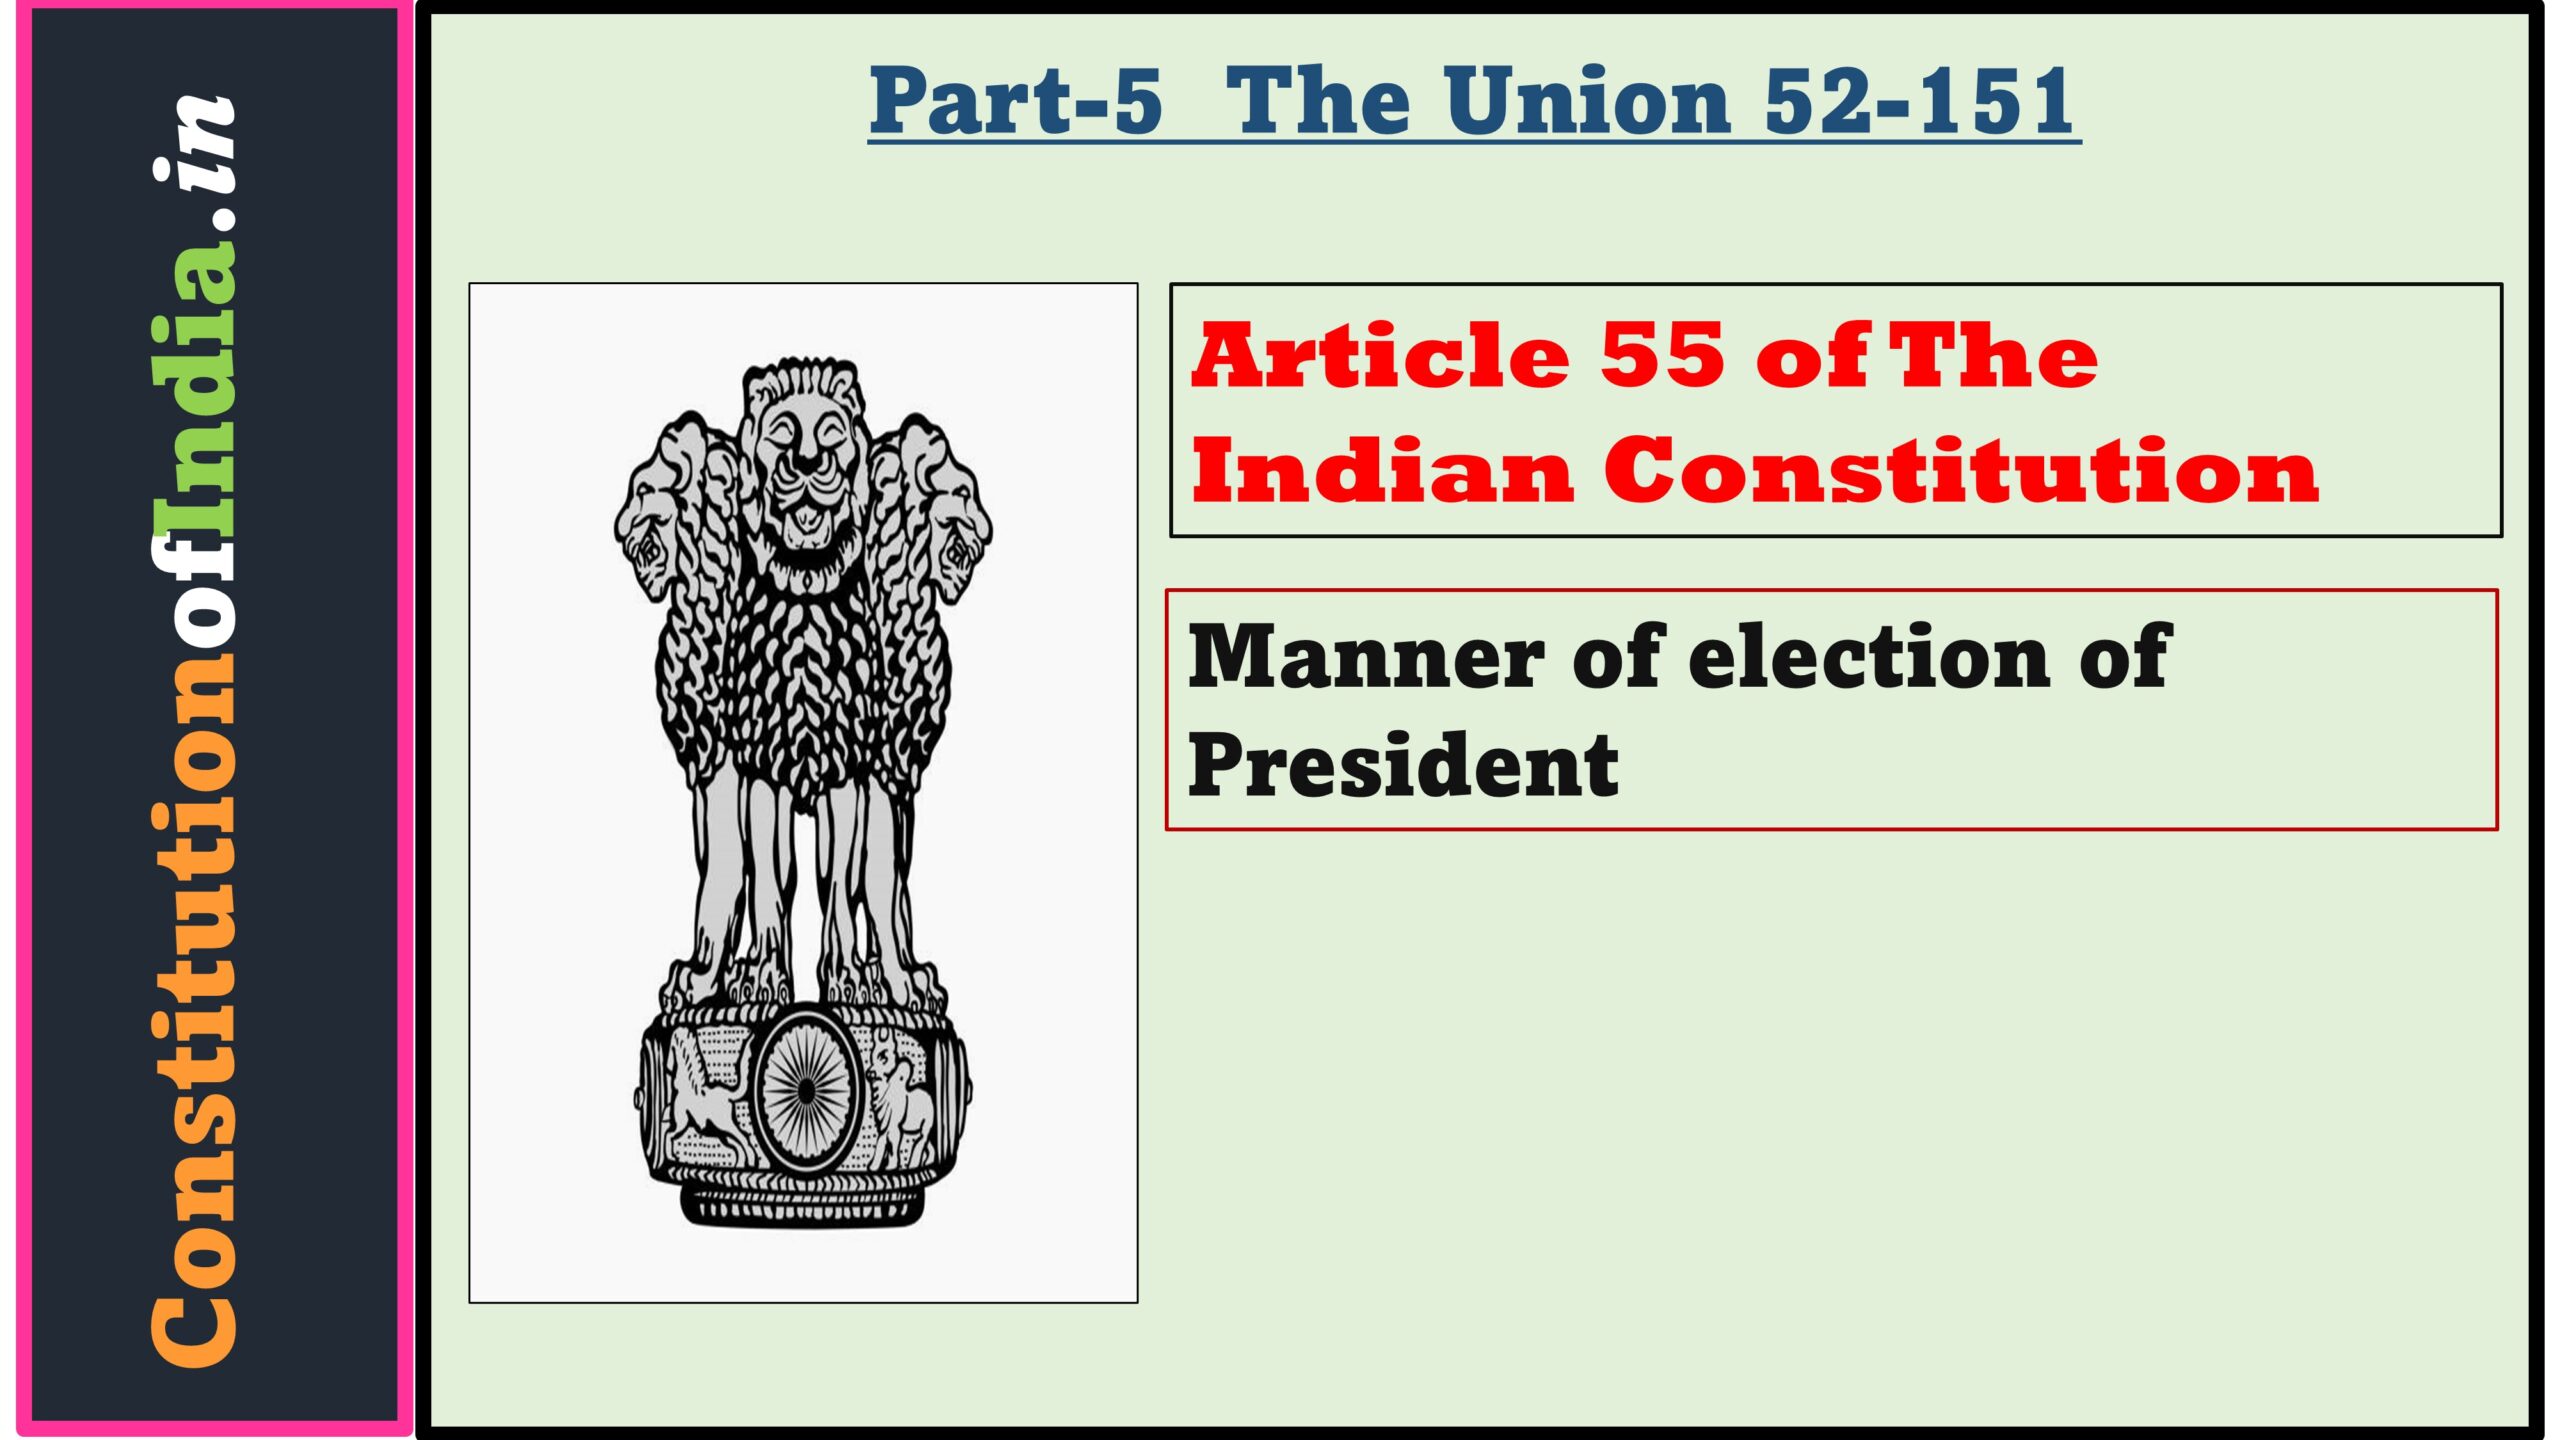 Article 55 of Indian Constitution